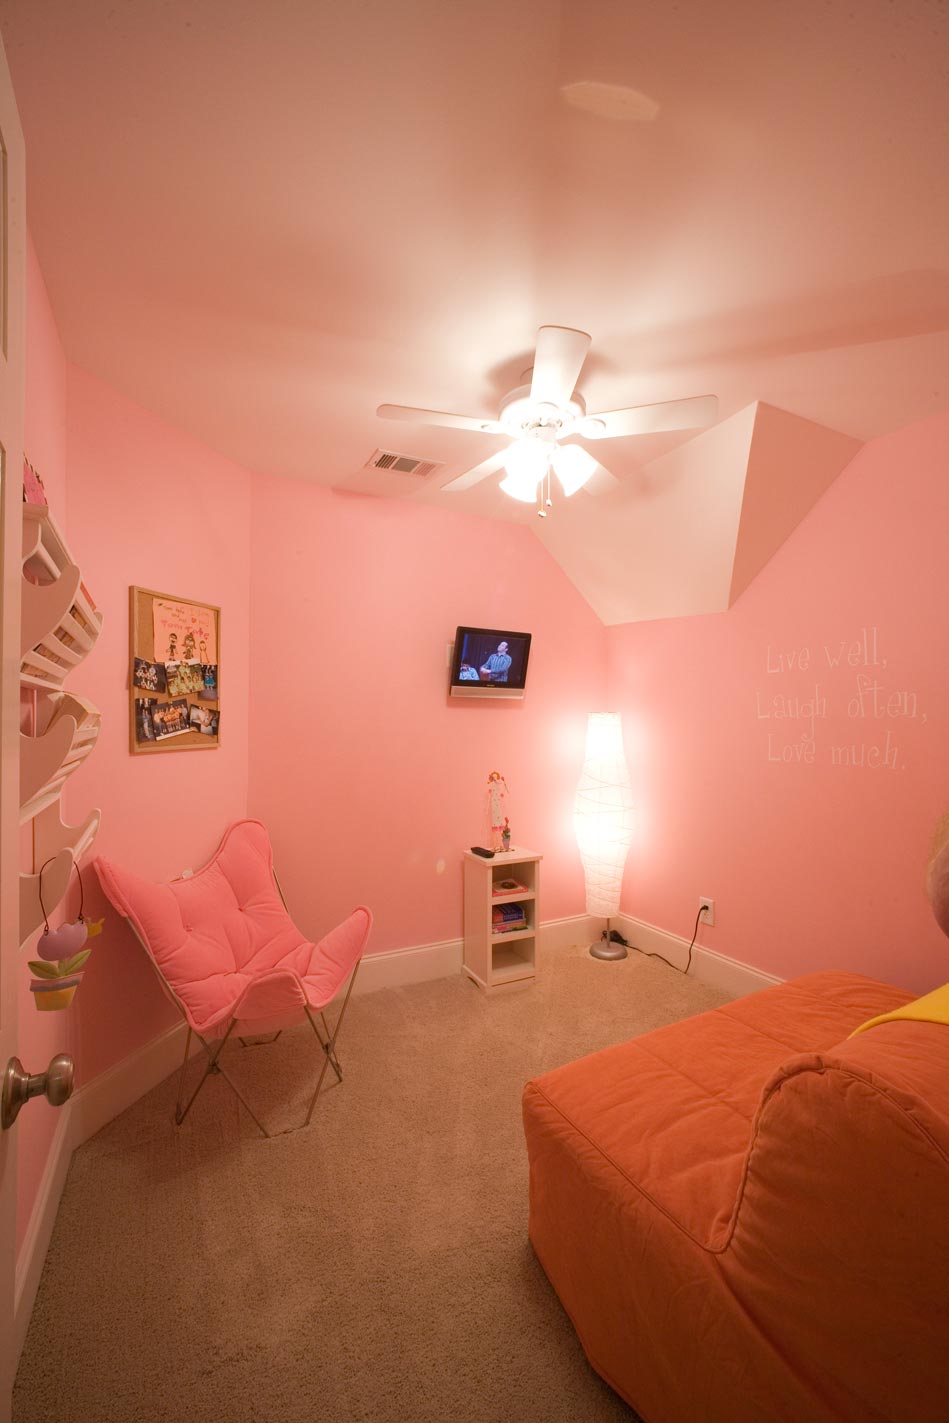 Additional upstairs room in all pink